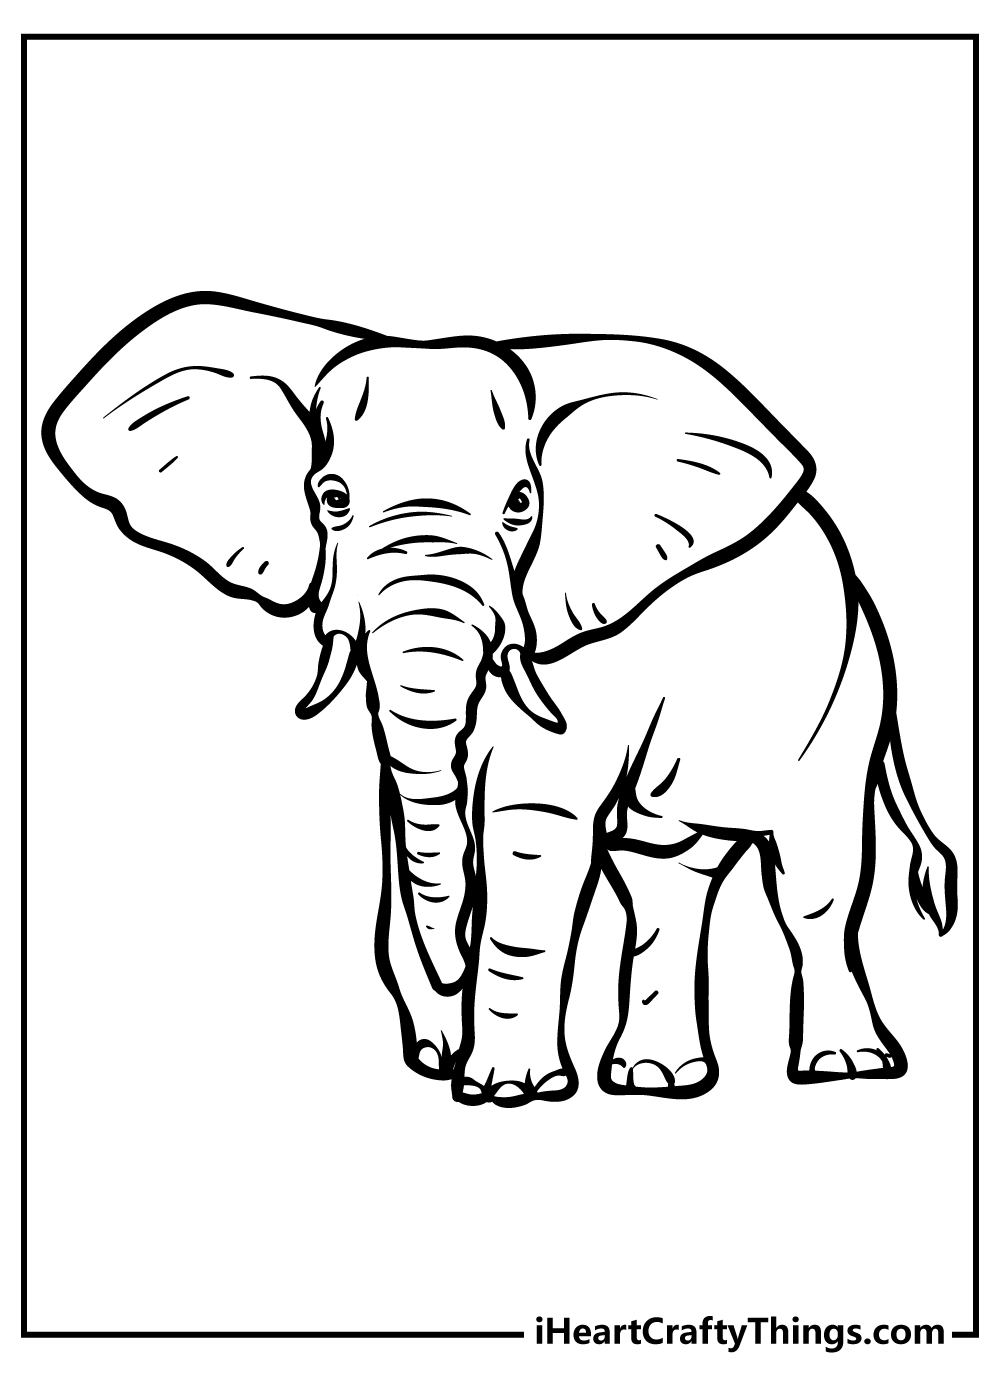 Elephant coloring pages free printable